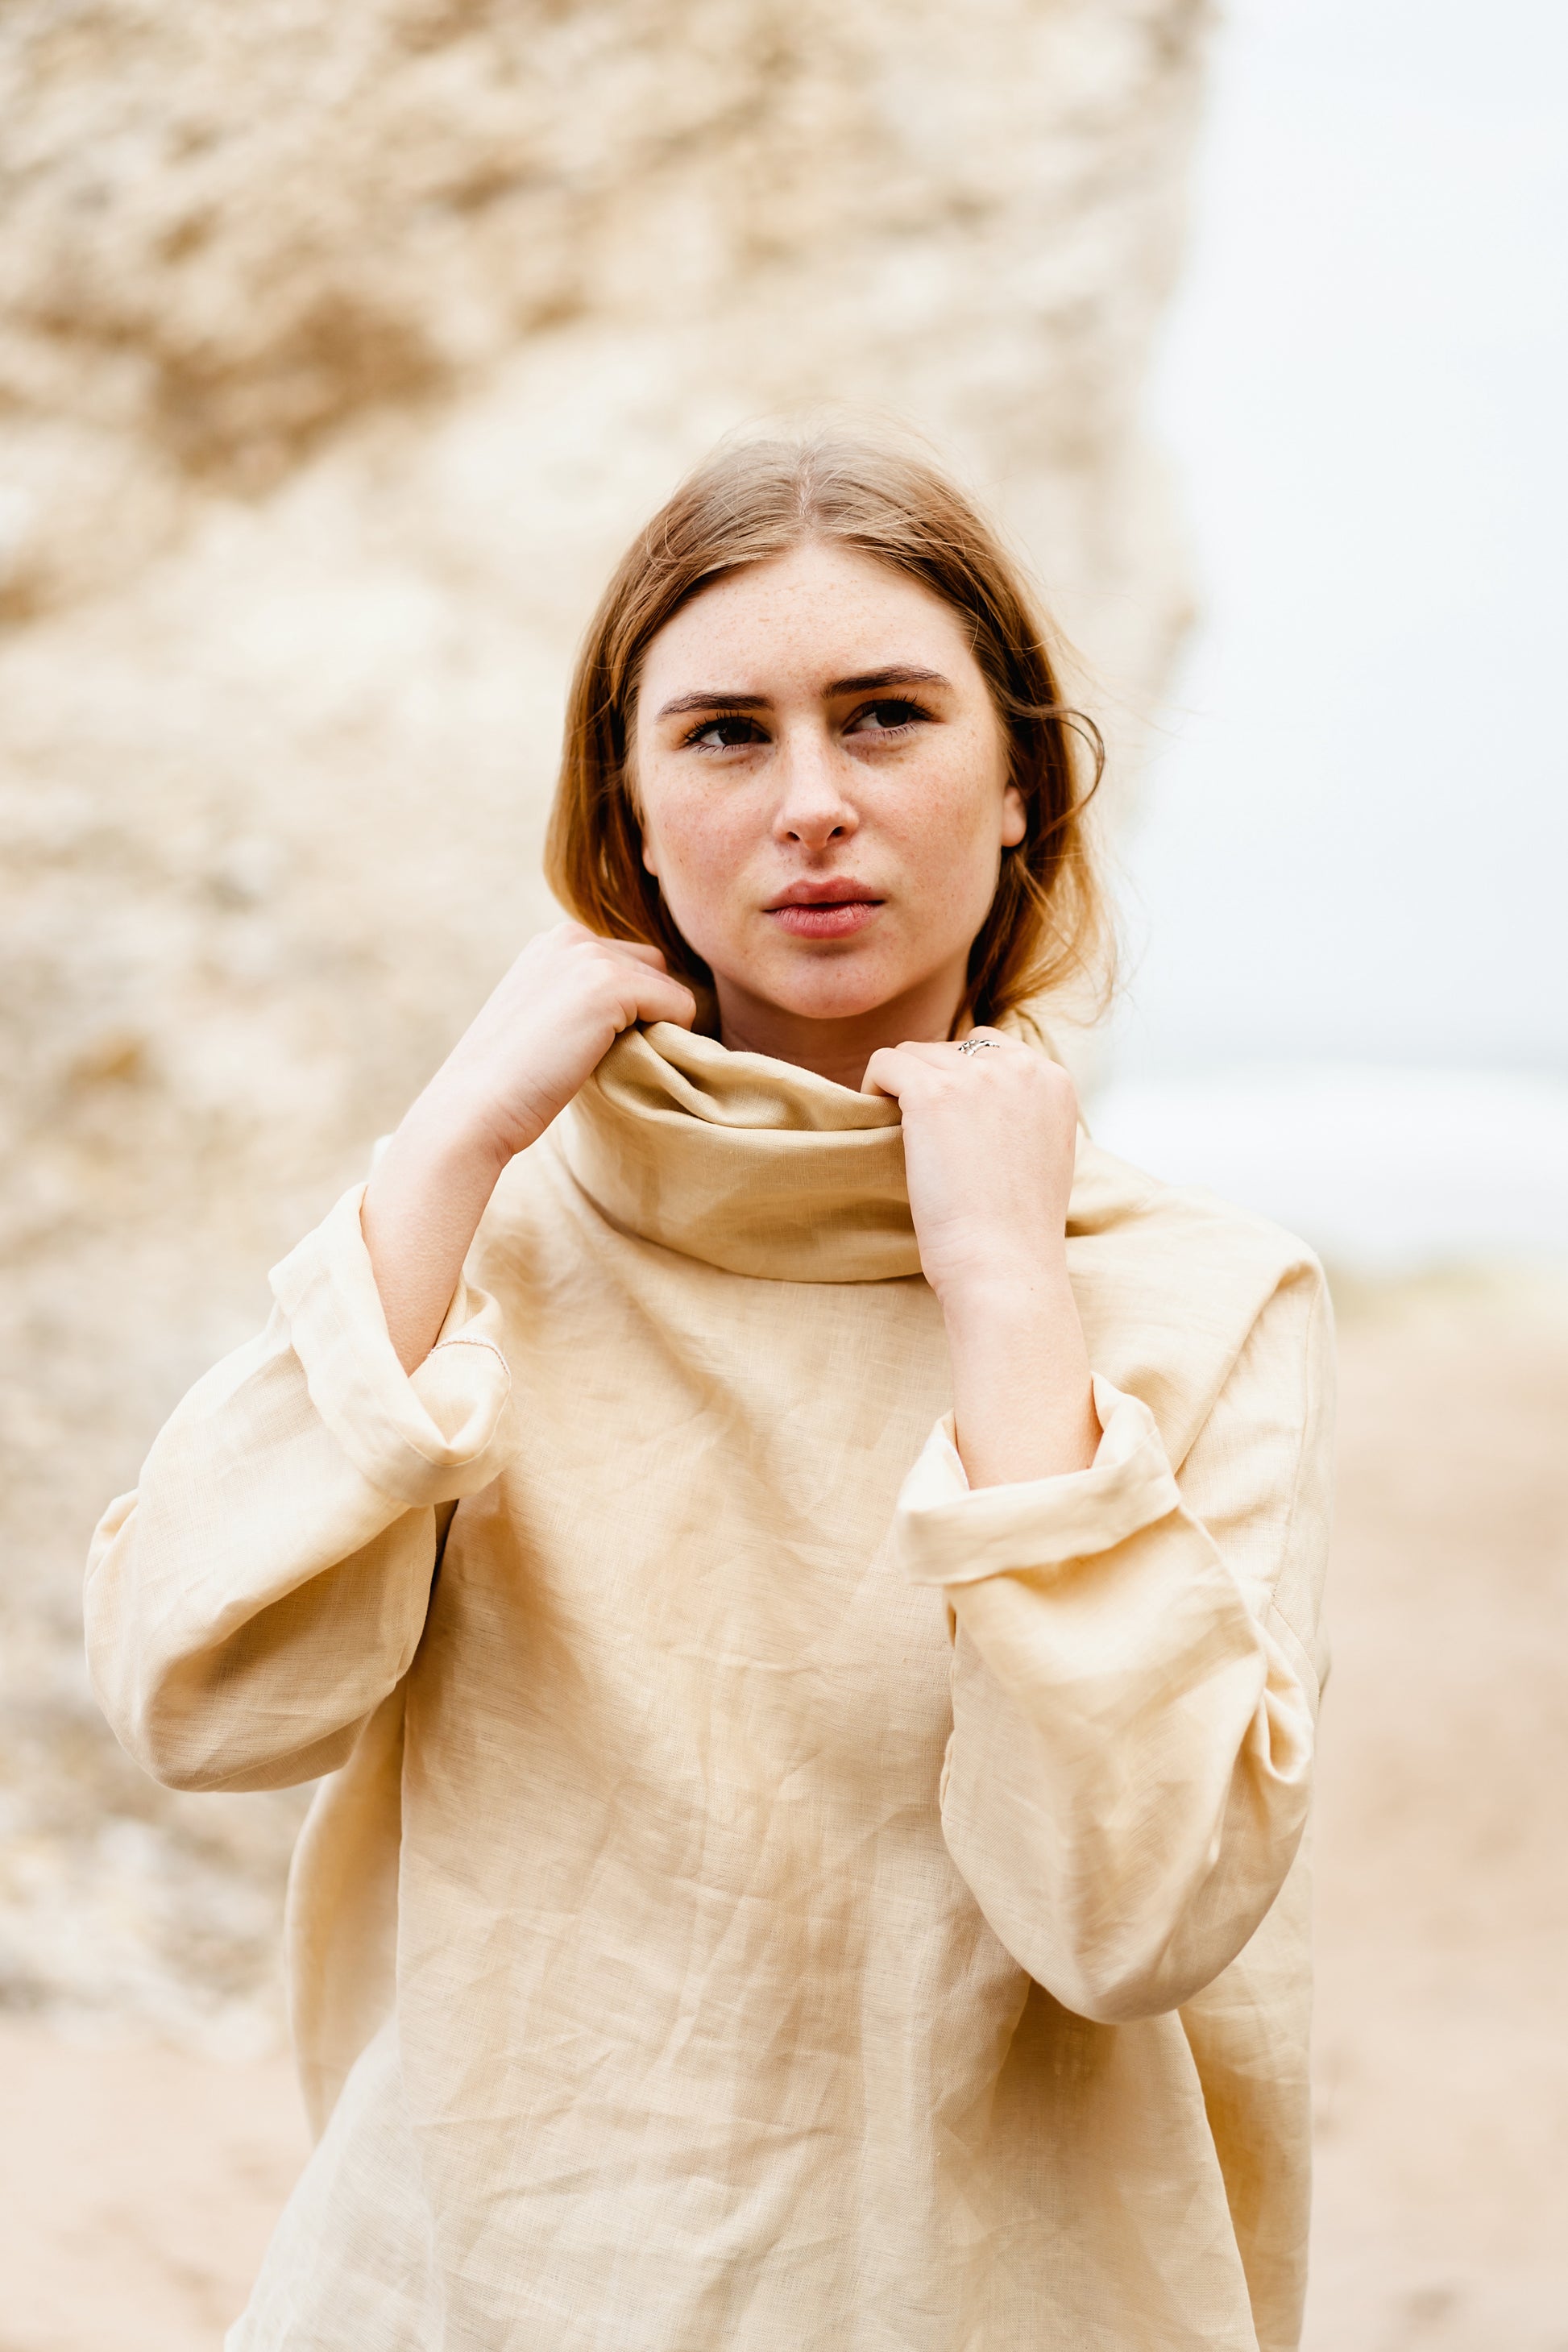 FREYA BLOUSE | Meet Cadlha's sister... Freya. Like her sister, she has a relaxed and oversized fit with that 'easy to throw on' vibe that we are all about. We love to create products that allow room for you to add your own personality to. The shirt has an